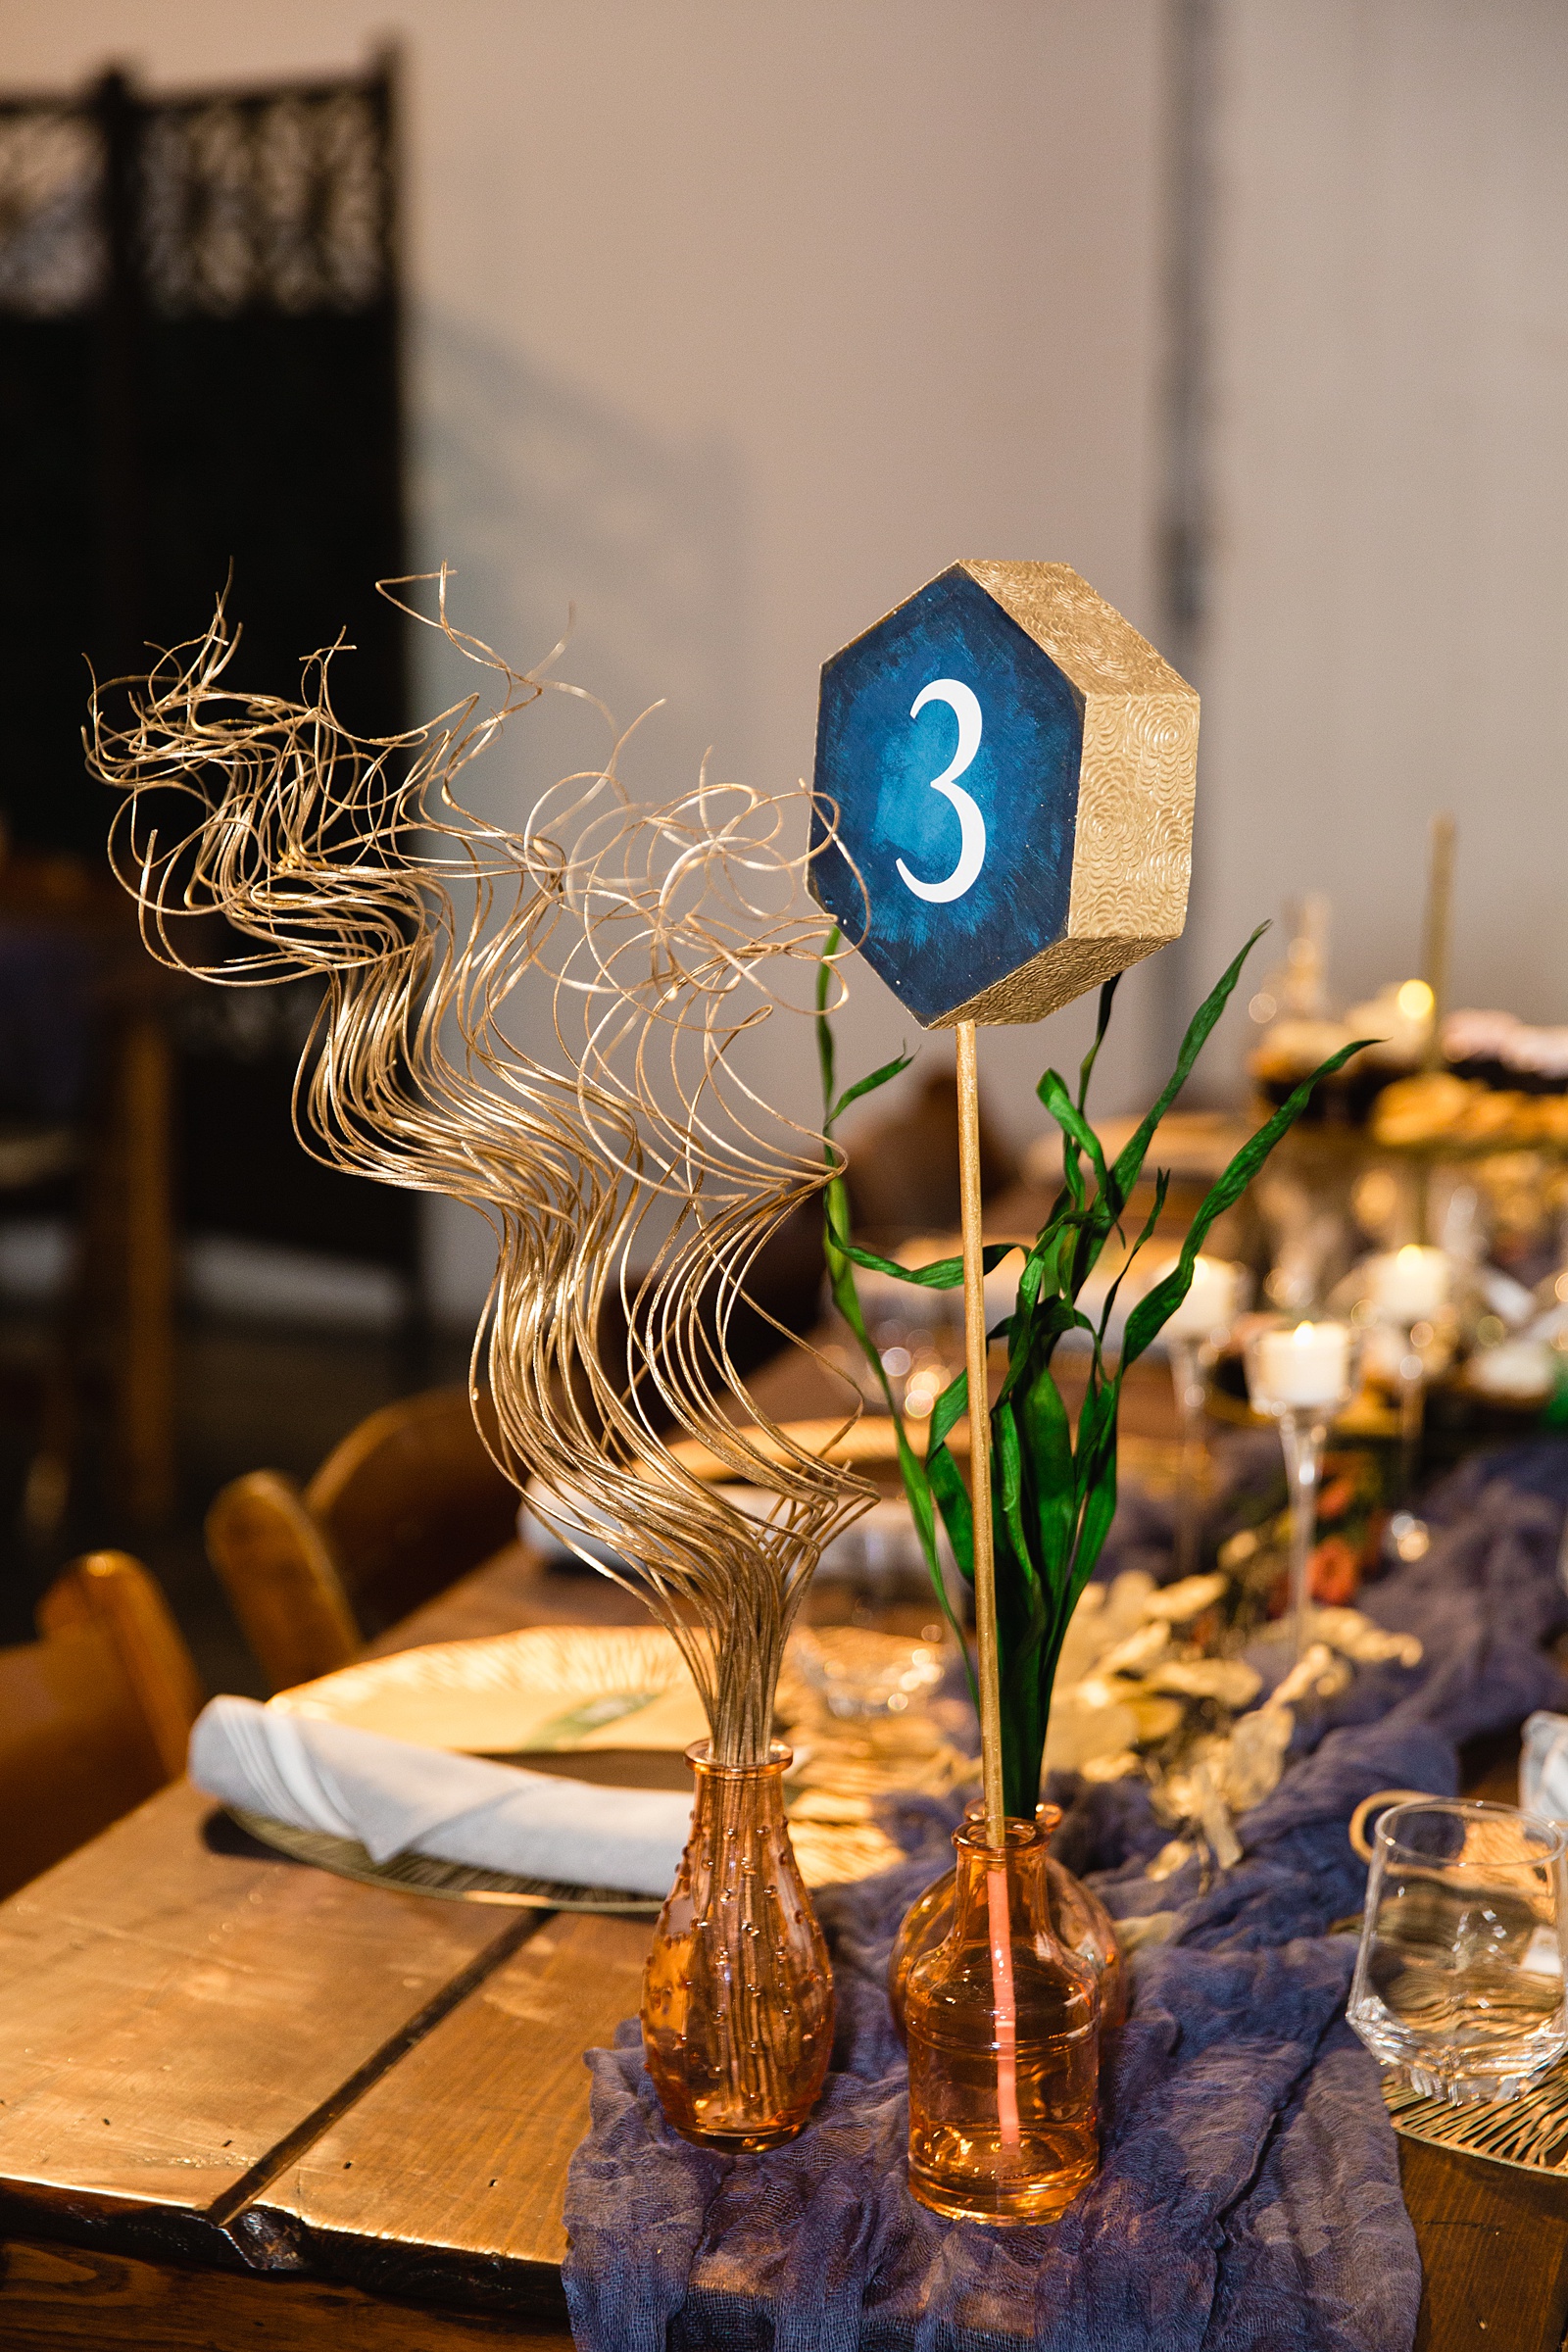 Gold and blue art deco inspired table number and reception decorations at MonOrchid wedding reception by Phoenix wedding photographer PMA Photography.